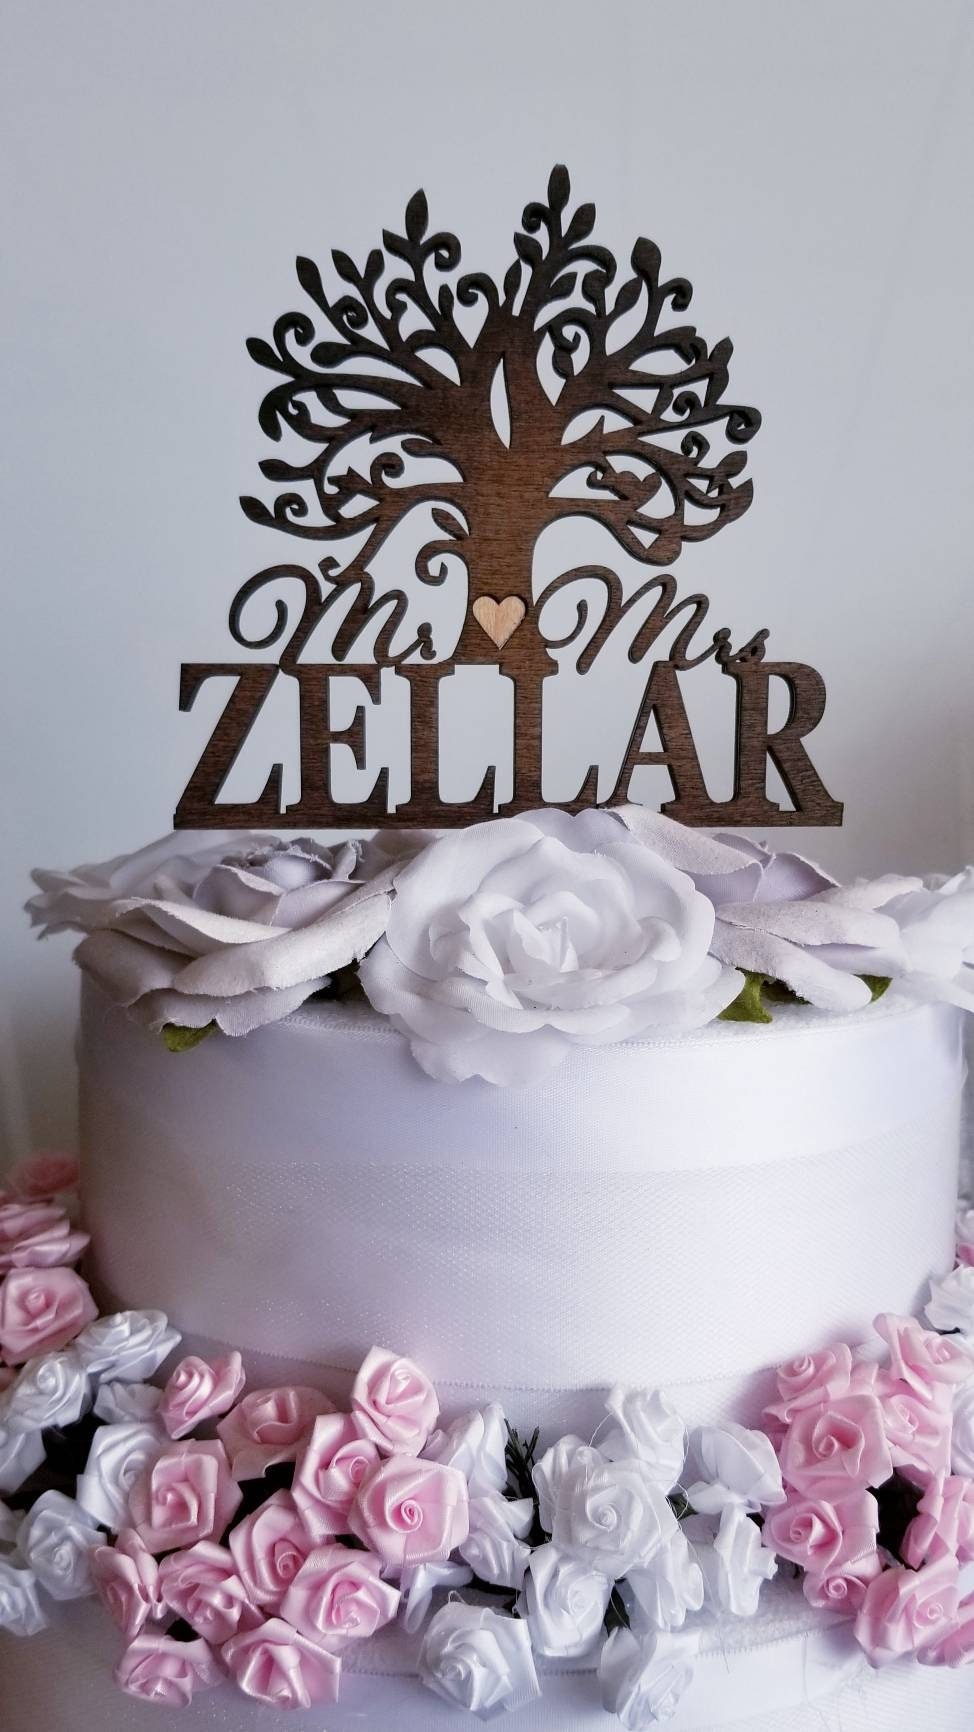 Wedding Cake Topper - Mr & Mrs Personalized Date - Fast Shipping